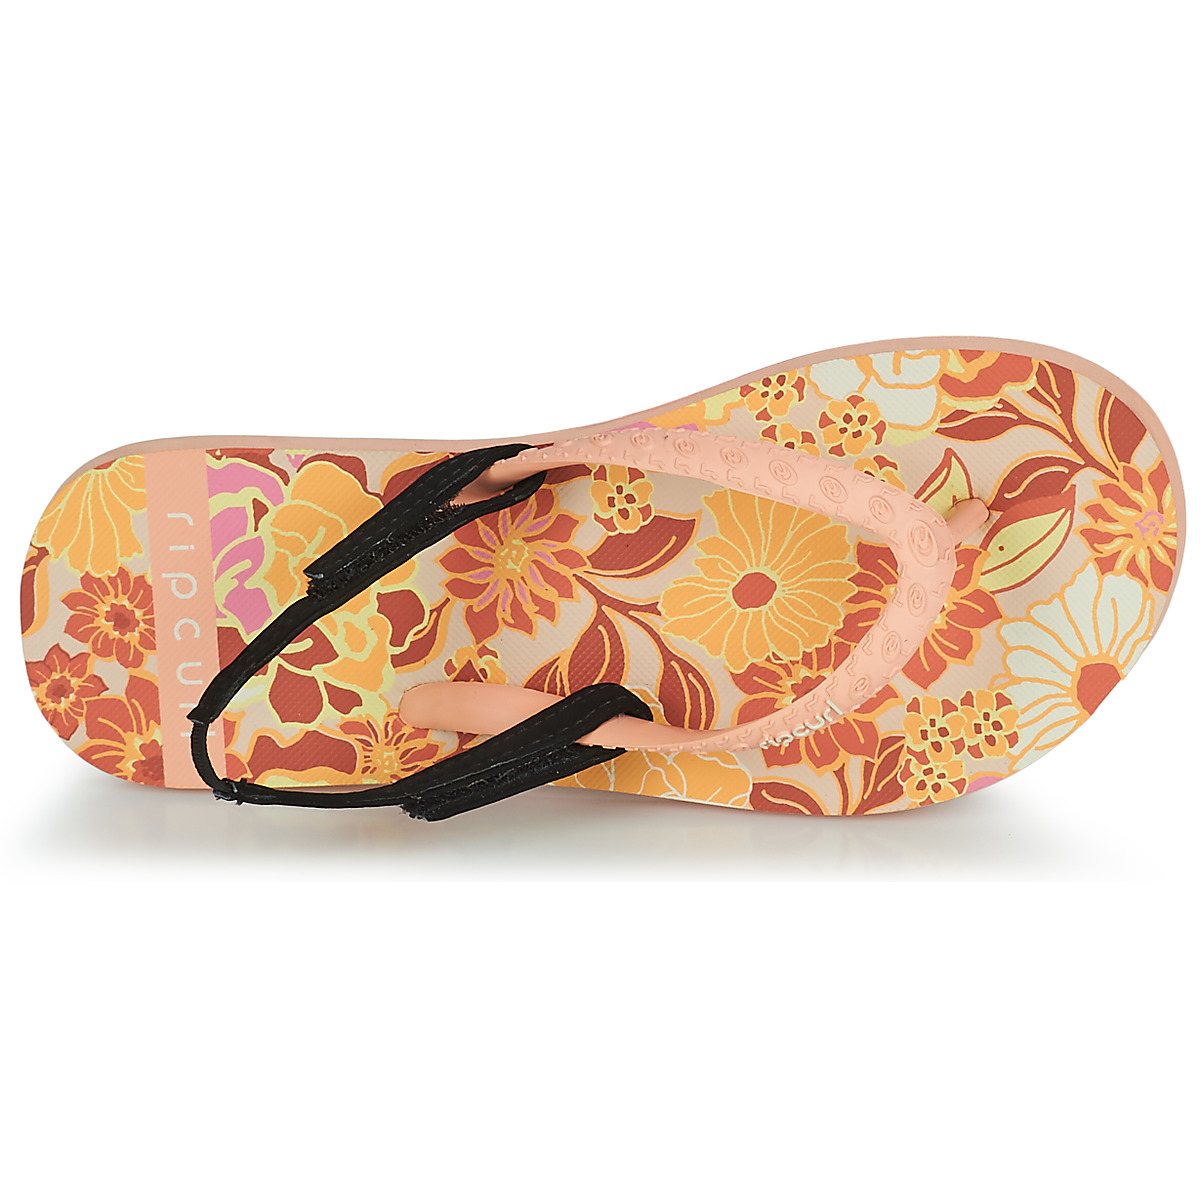 Rip Curl Rose WAVES SHAPERS FLORAL GIRL WbMIQ7x1